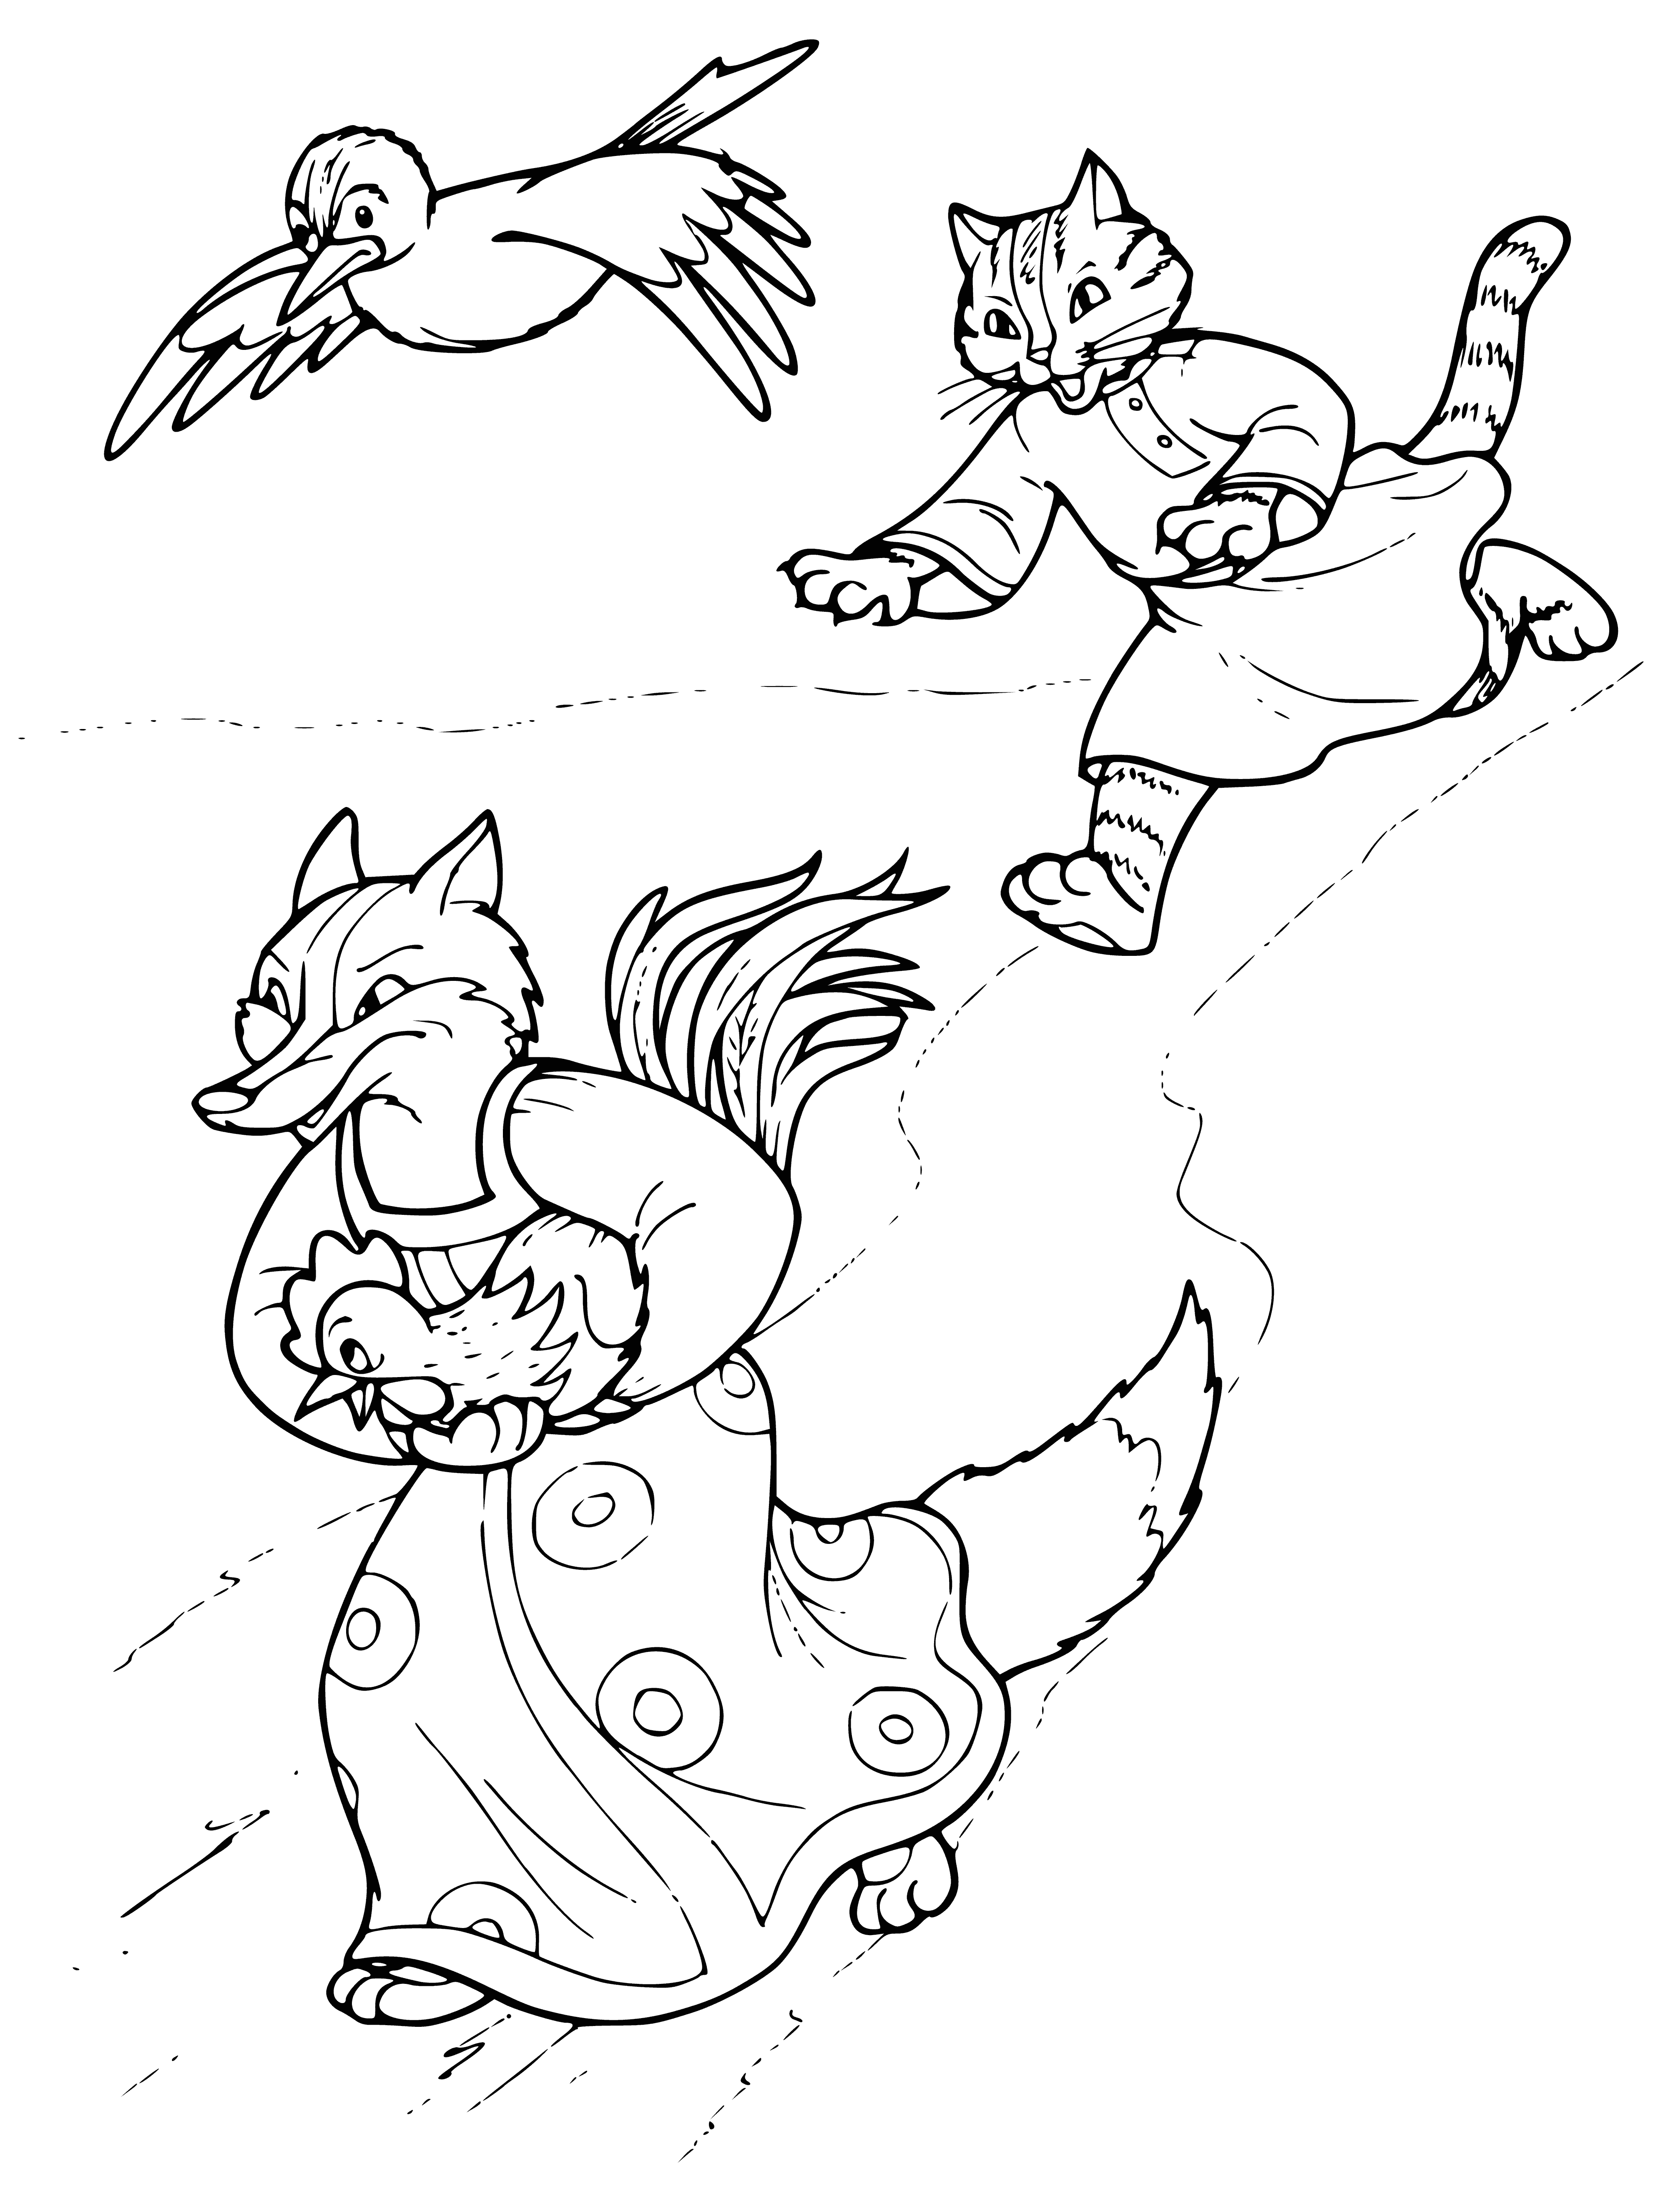 Chase coloring page